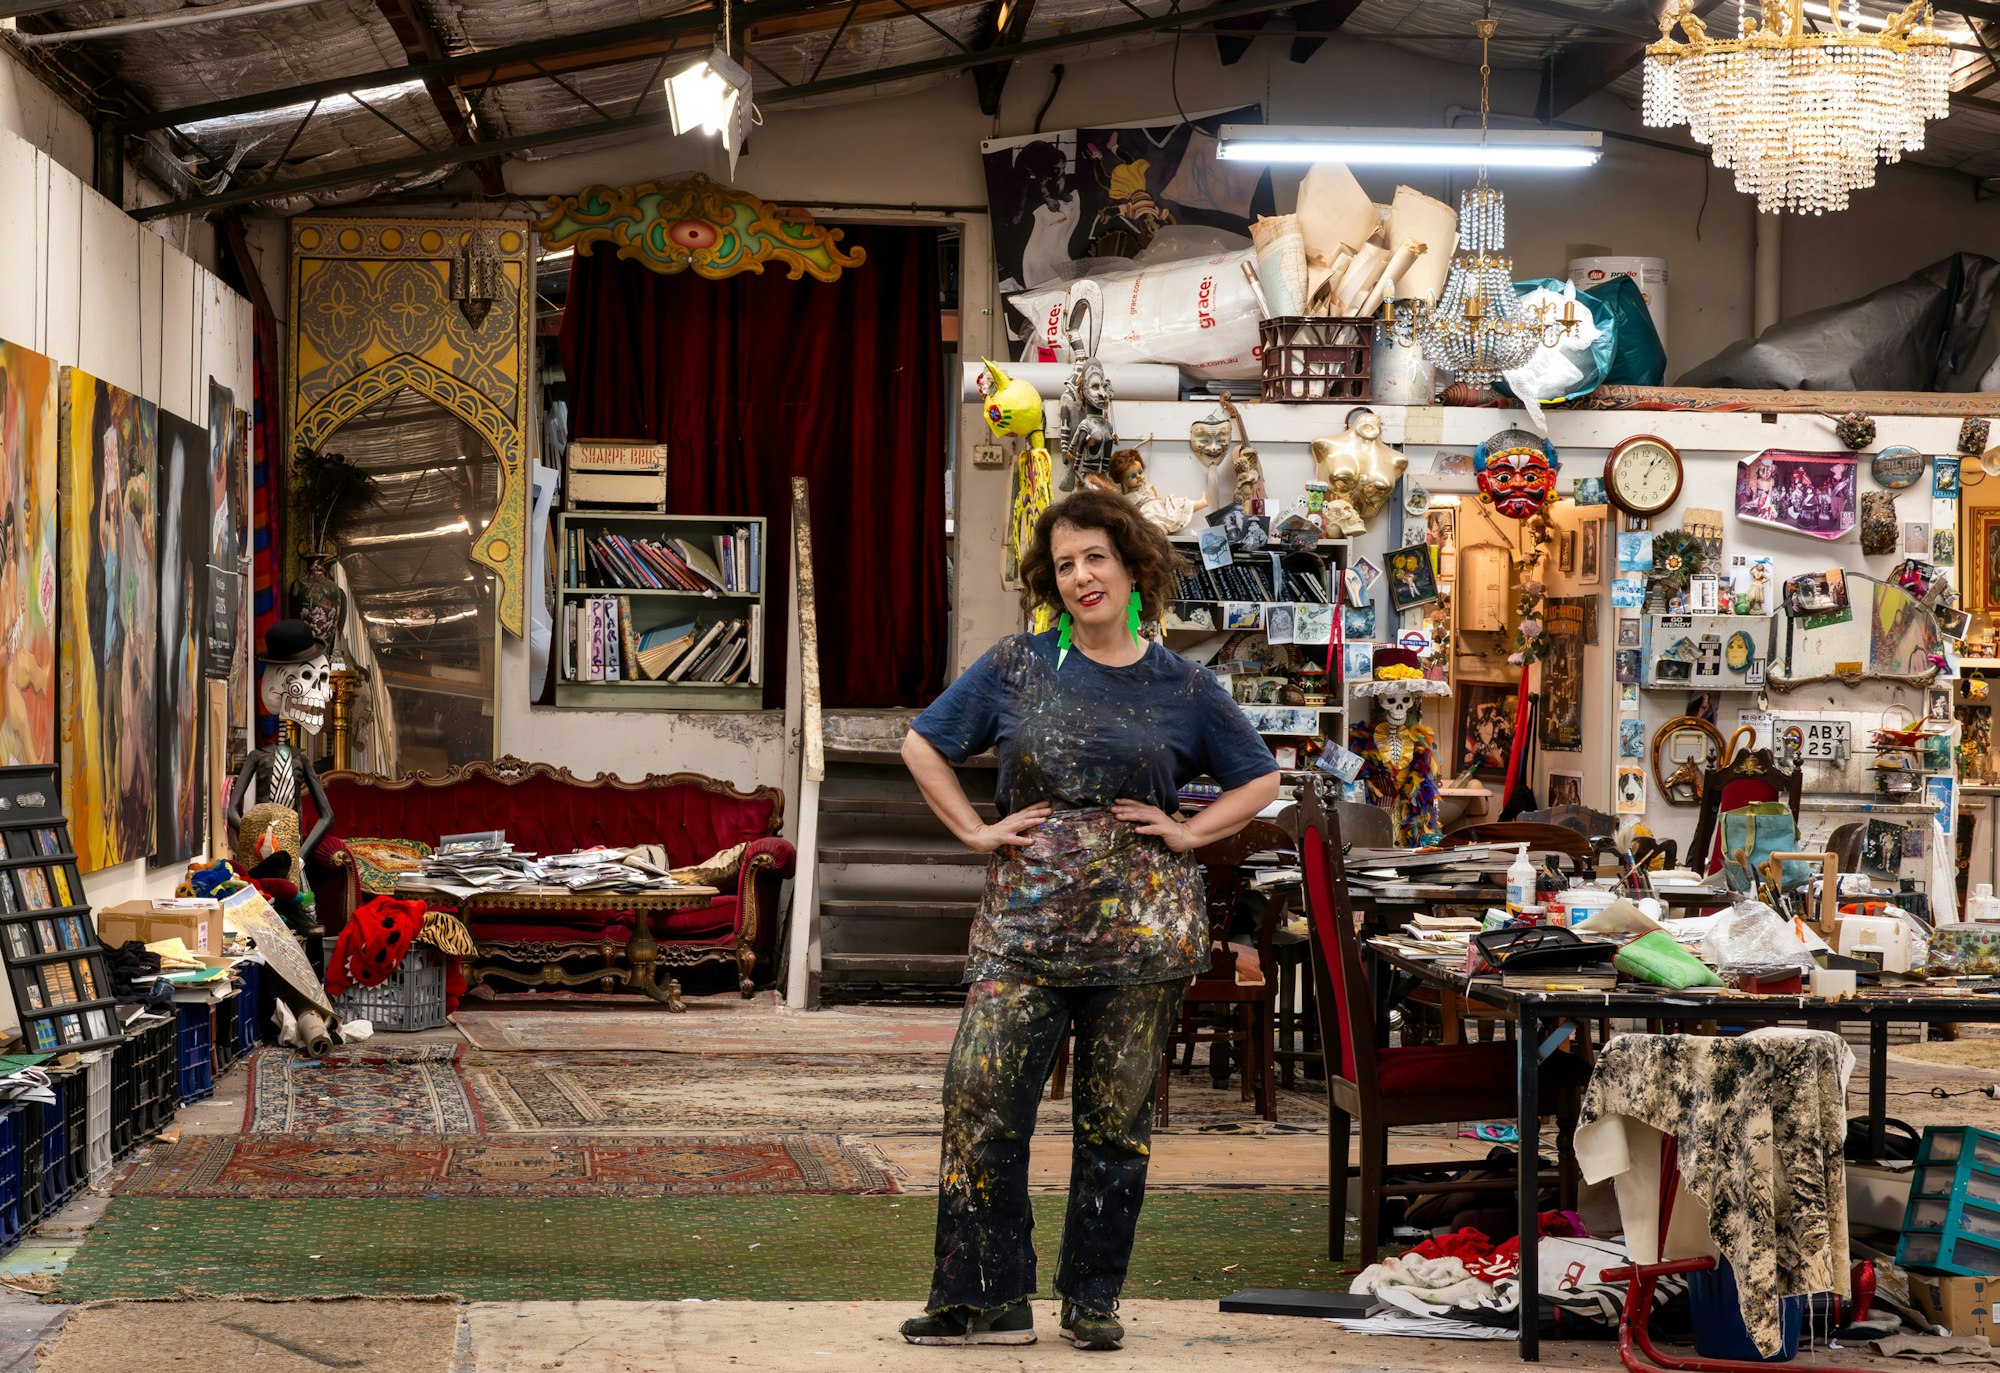 A person in paint-spattered clothes stands in a large high-ceilinged room surrounded by many art-related objects